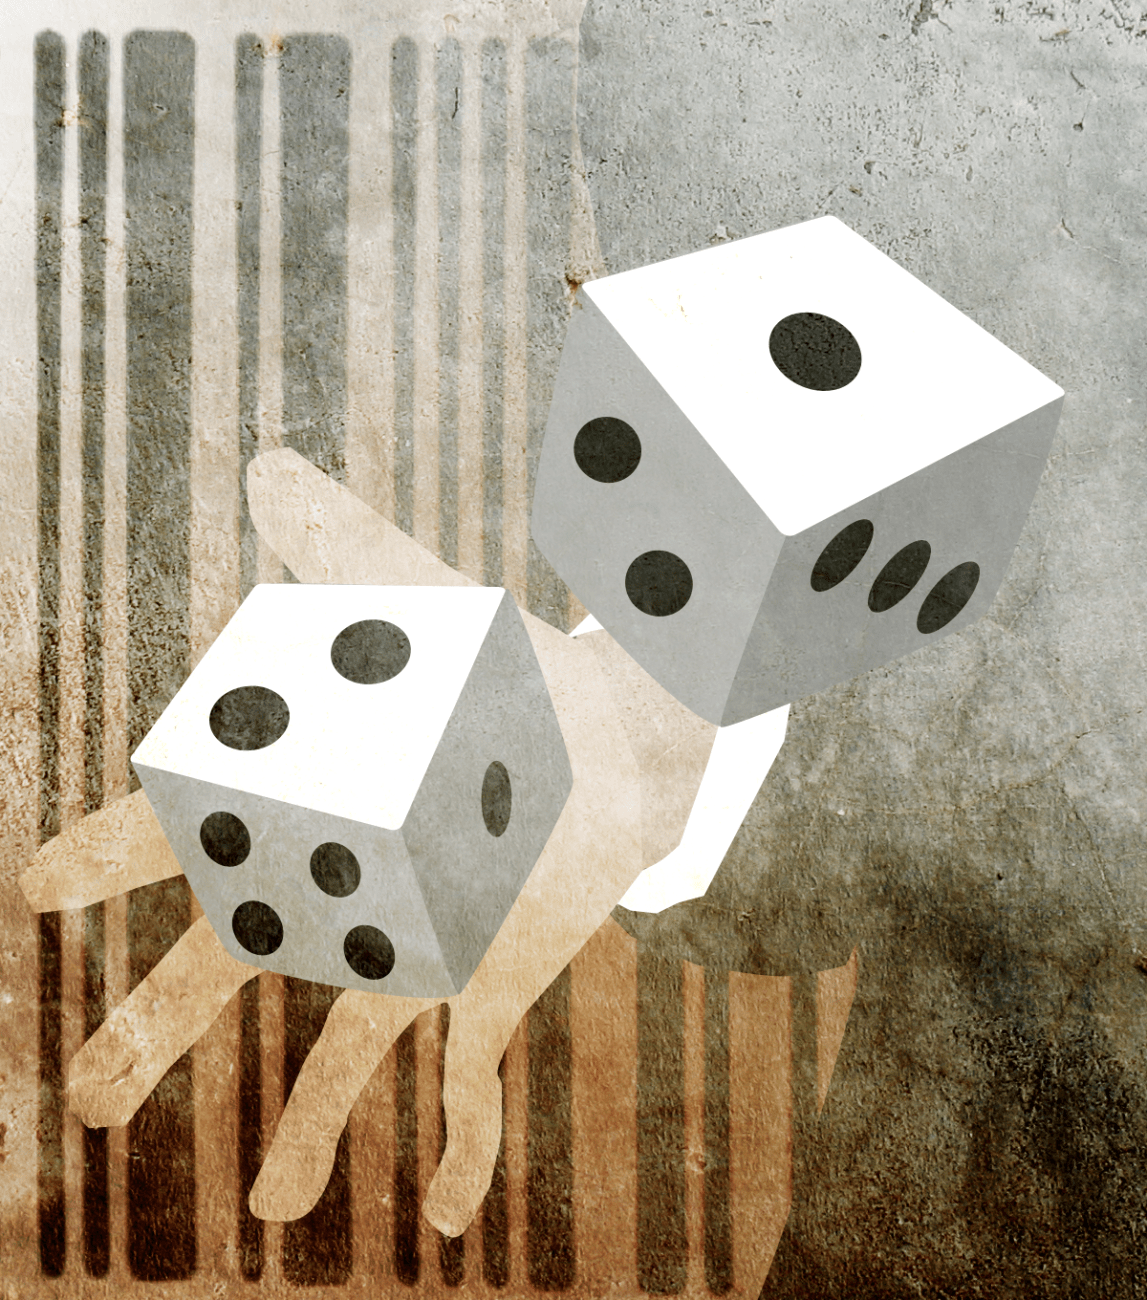 two dice being rolled